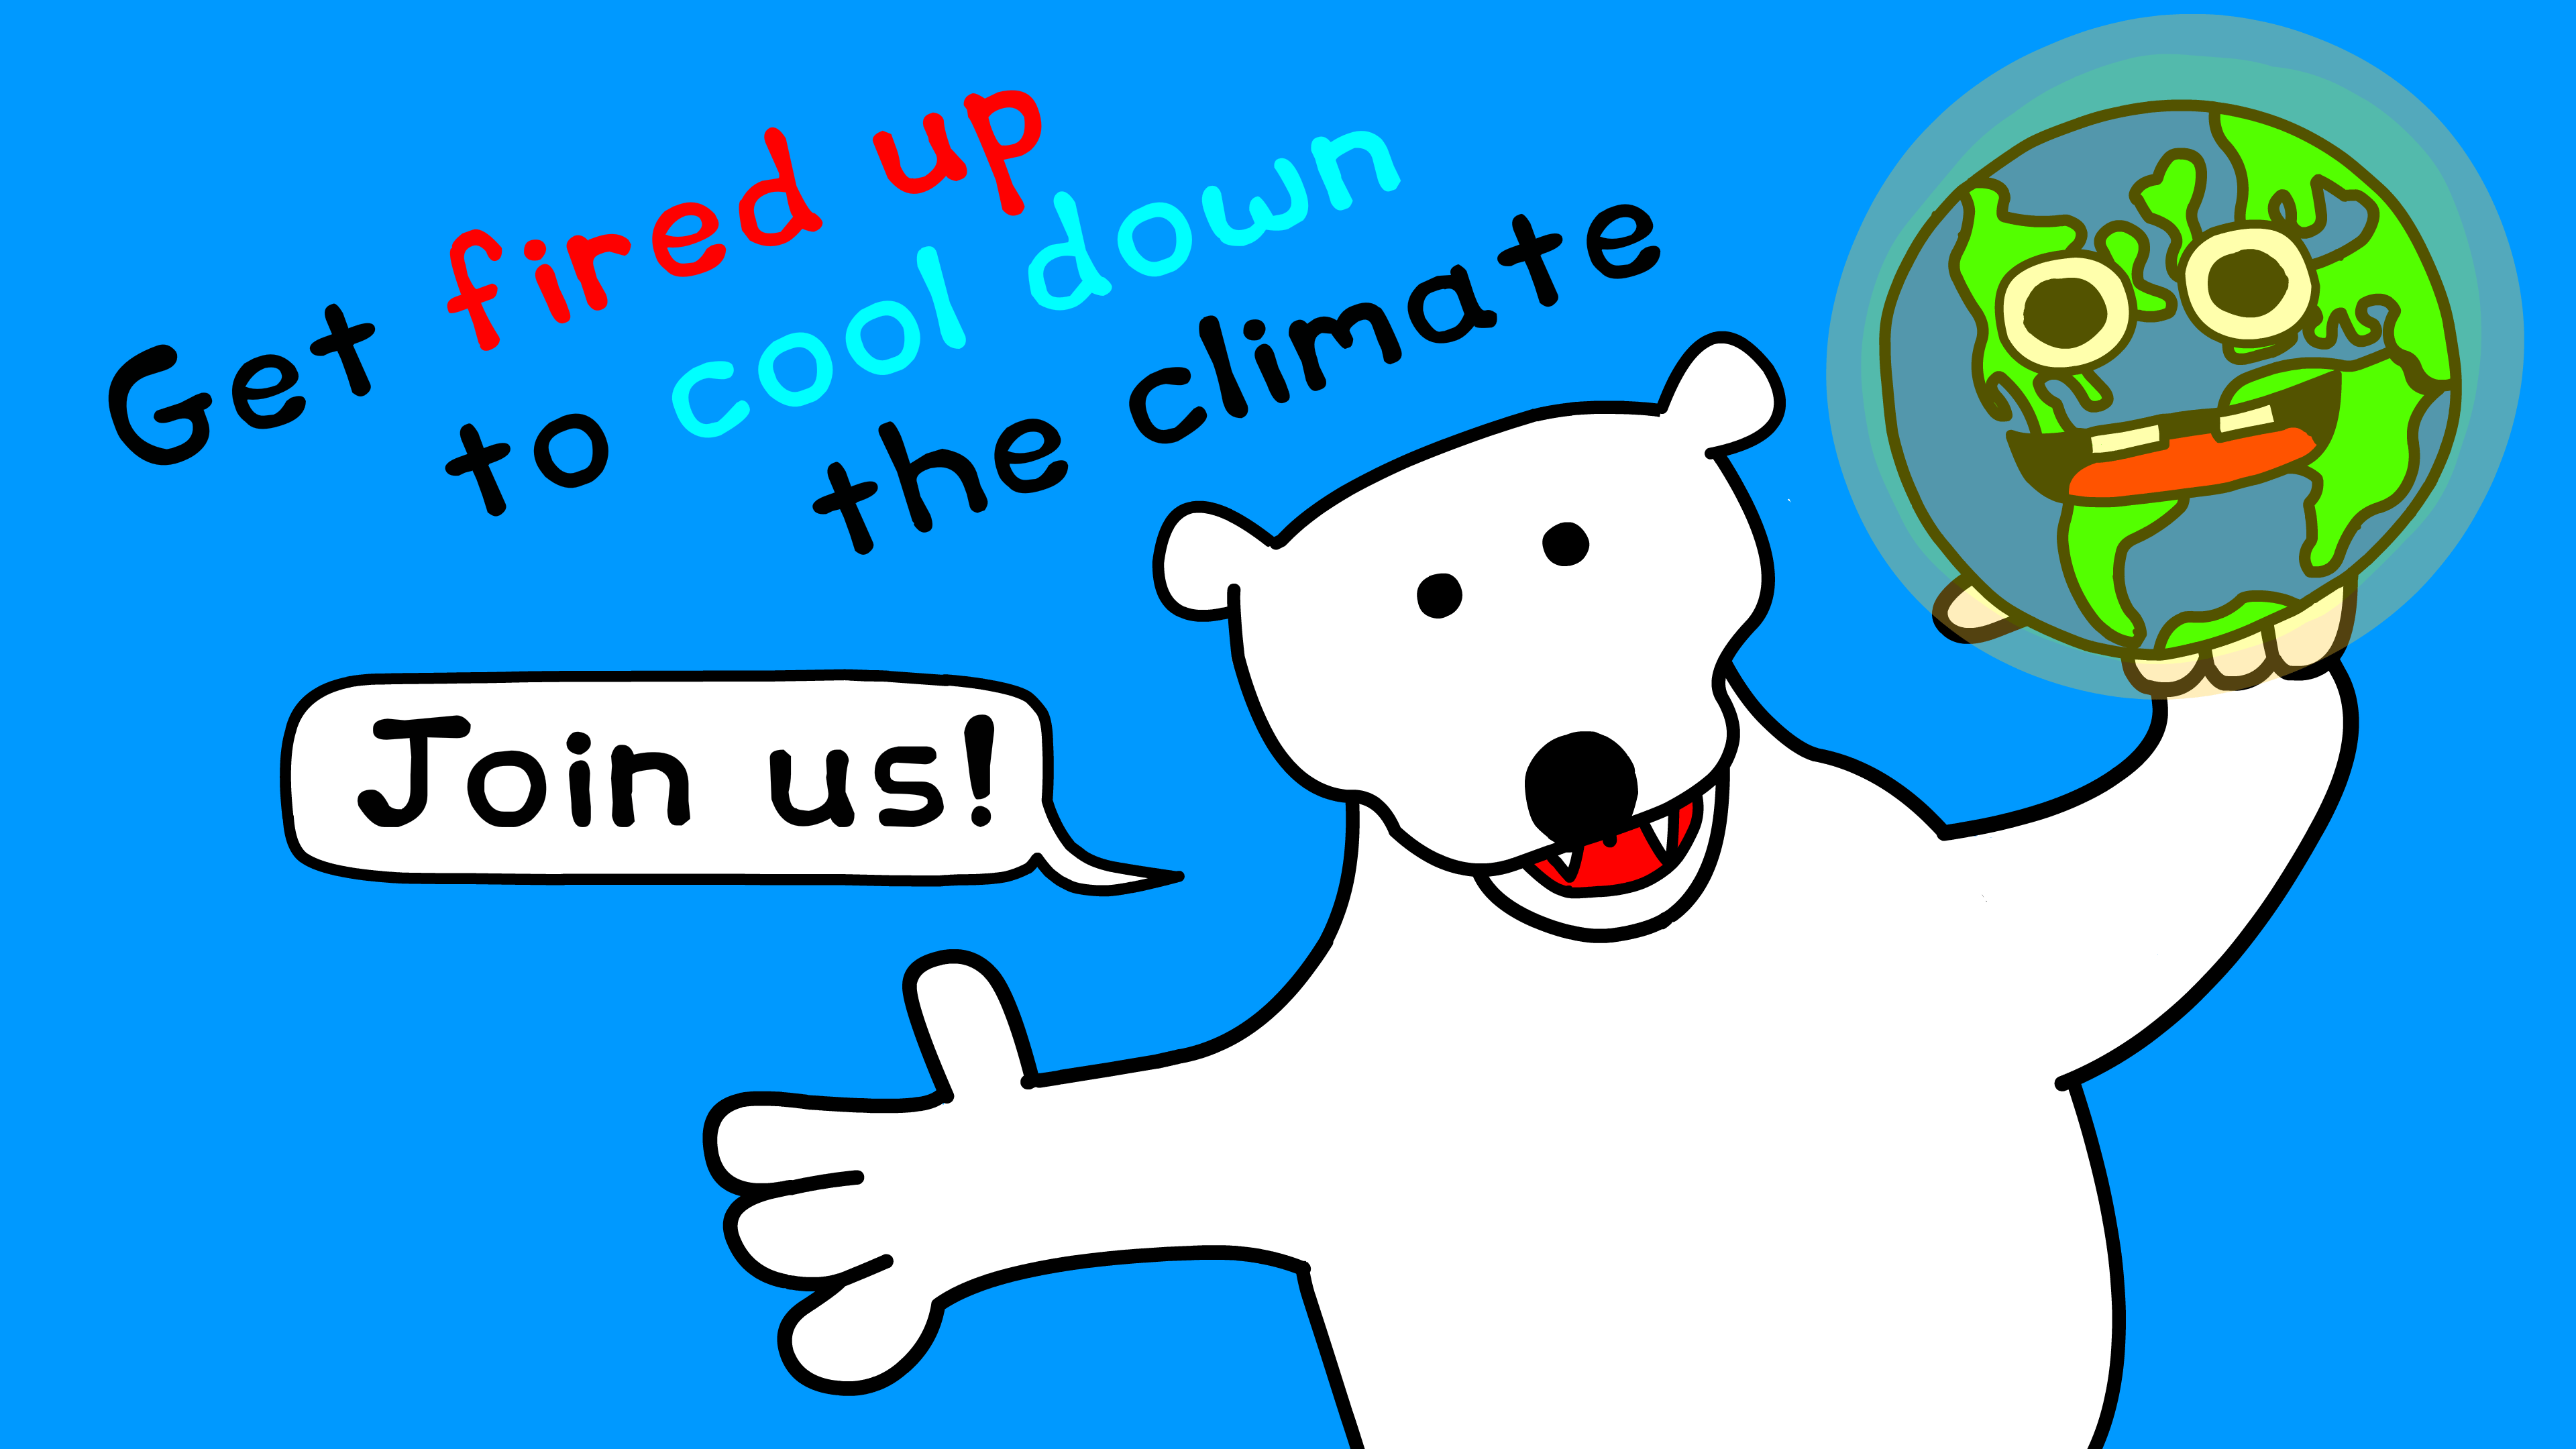 cool the climate Newsletter